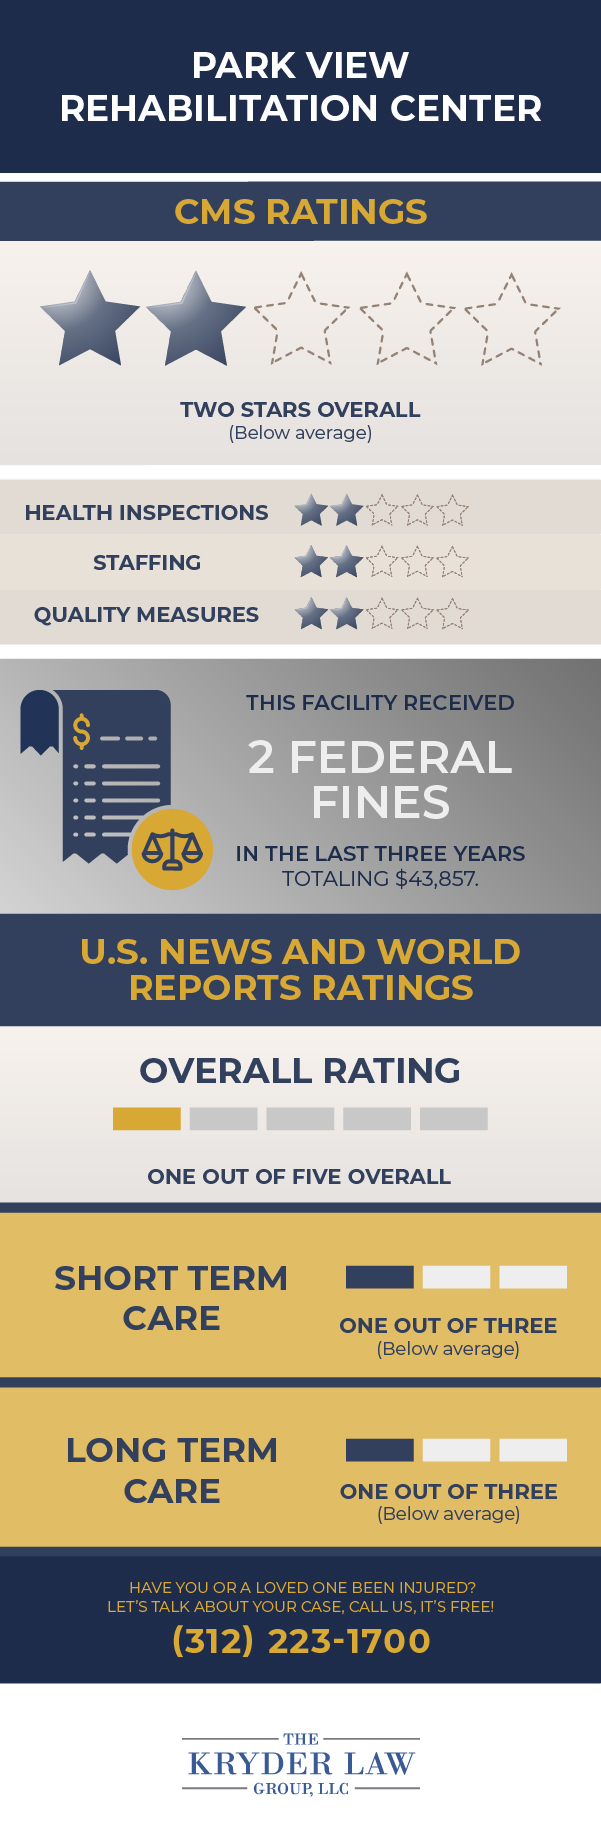 Park View Rehabilitation Center CMS Ratings and U.S. News and World Reports Ratings